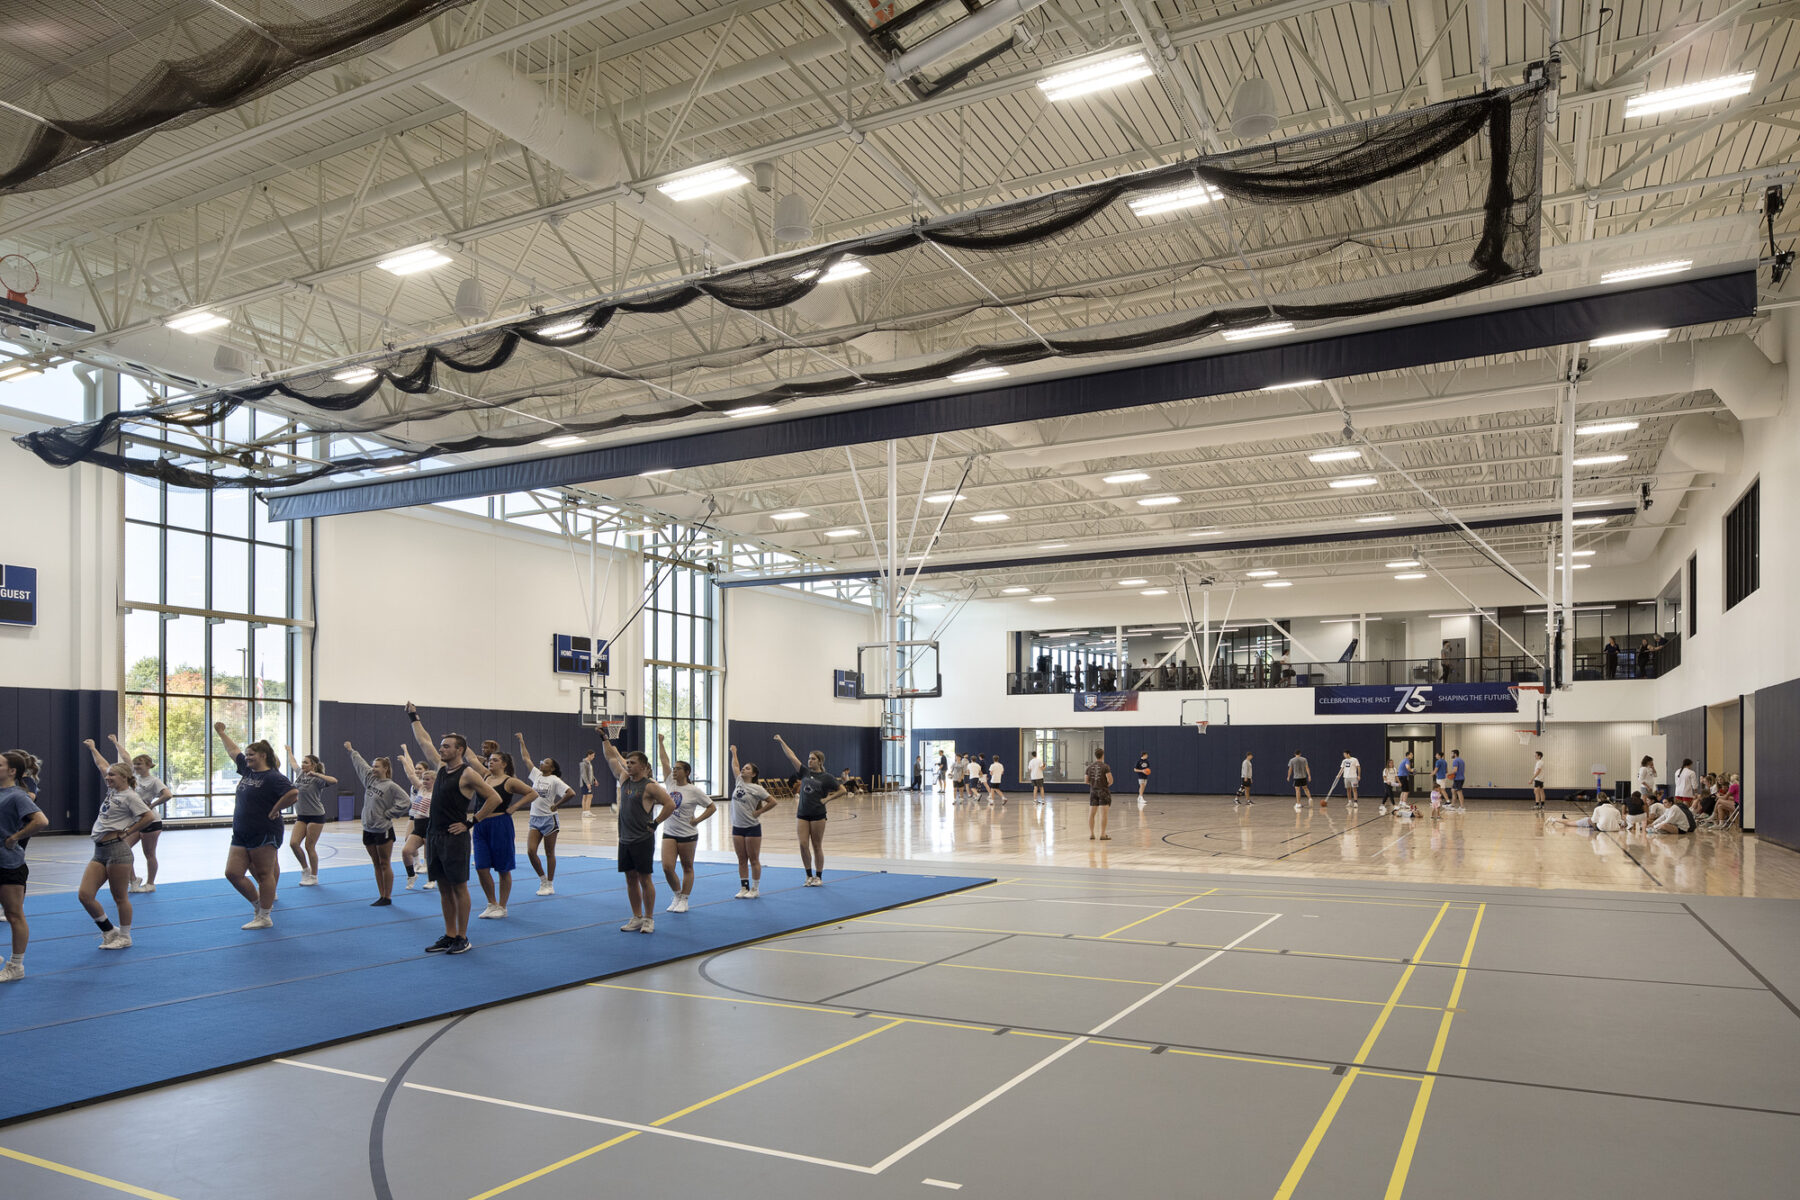 interior photograph of large gymnasium space with basketball courts and multi-use courts. Cheerleaders practicing in foreground